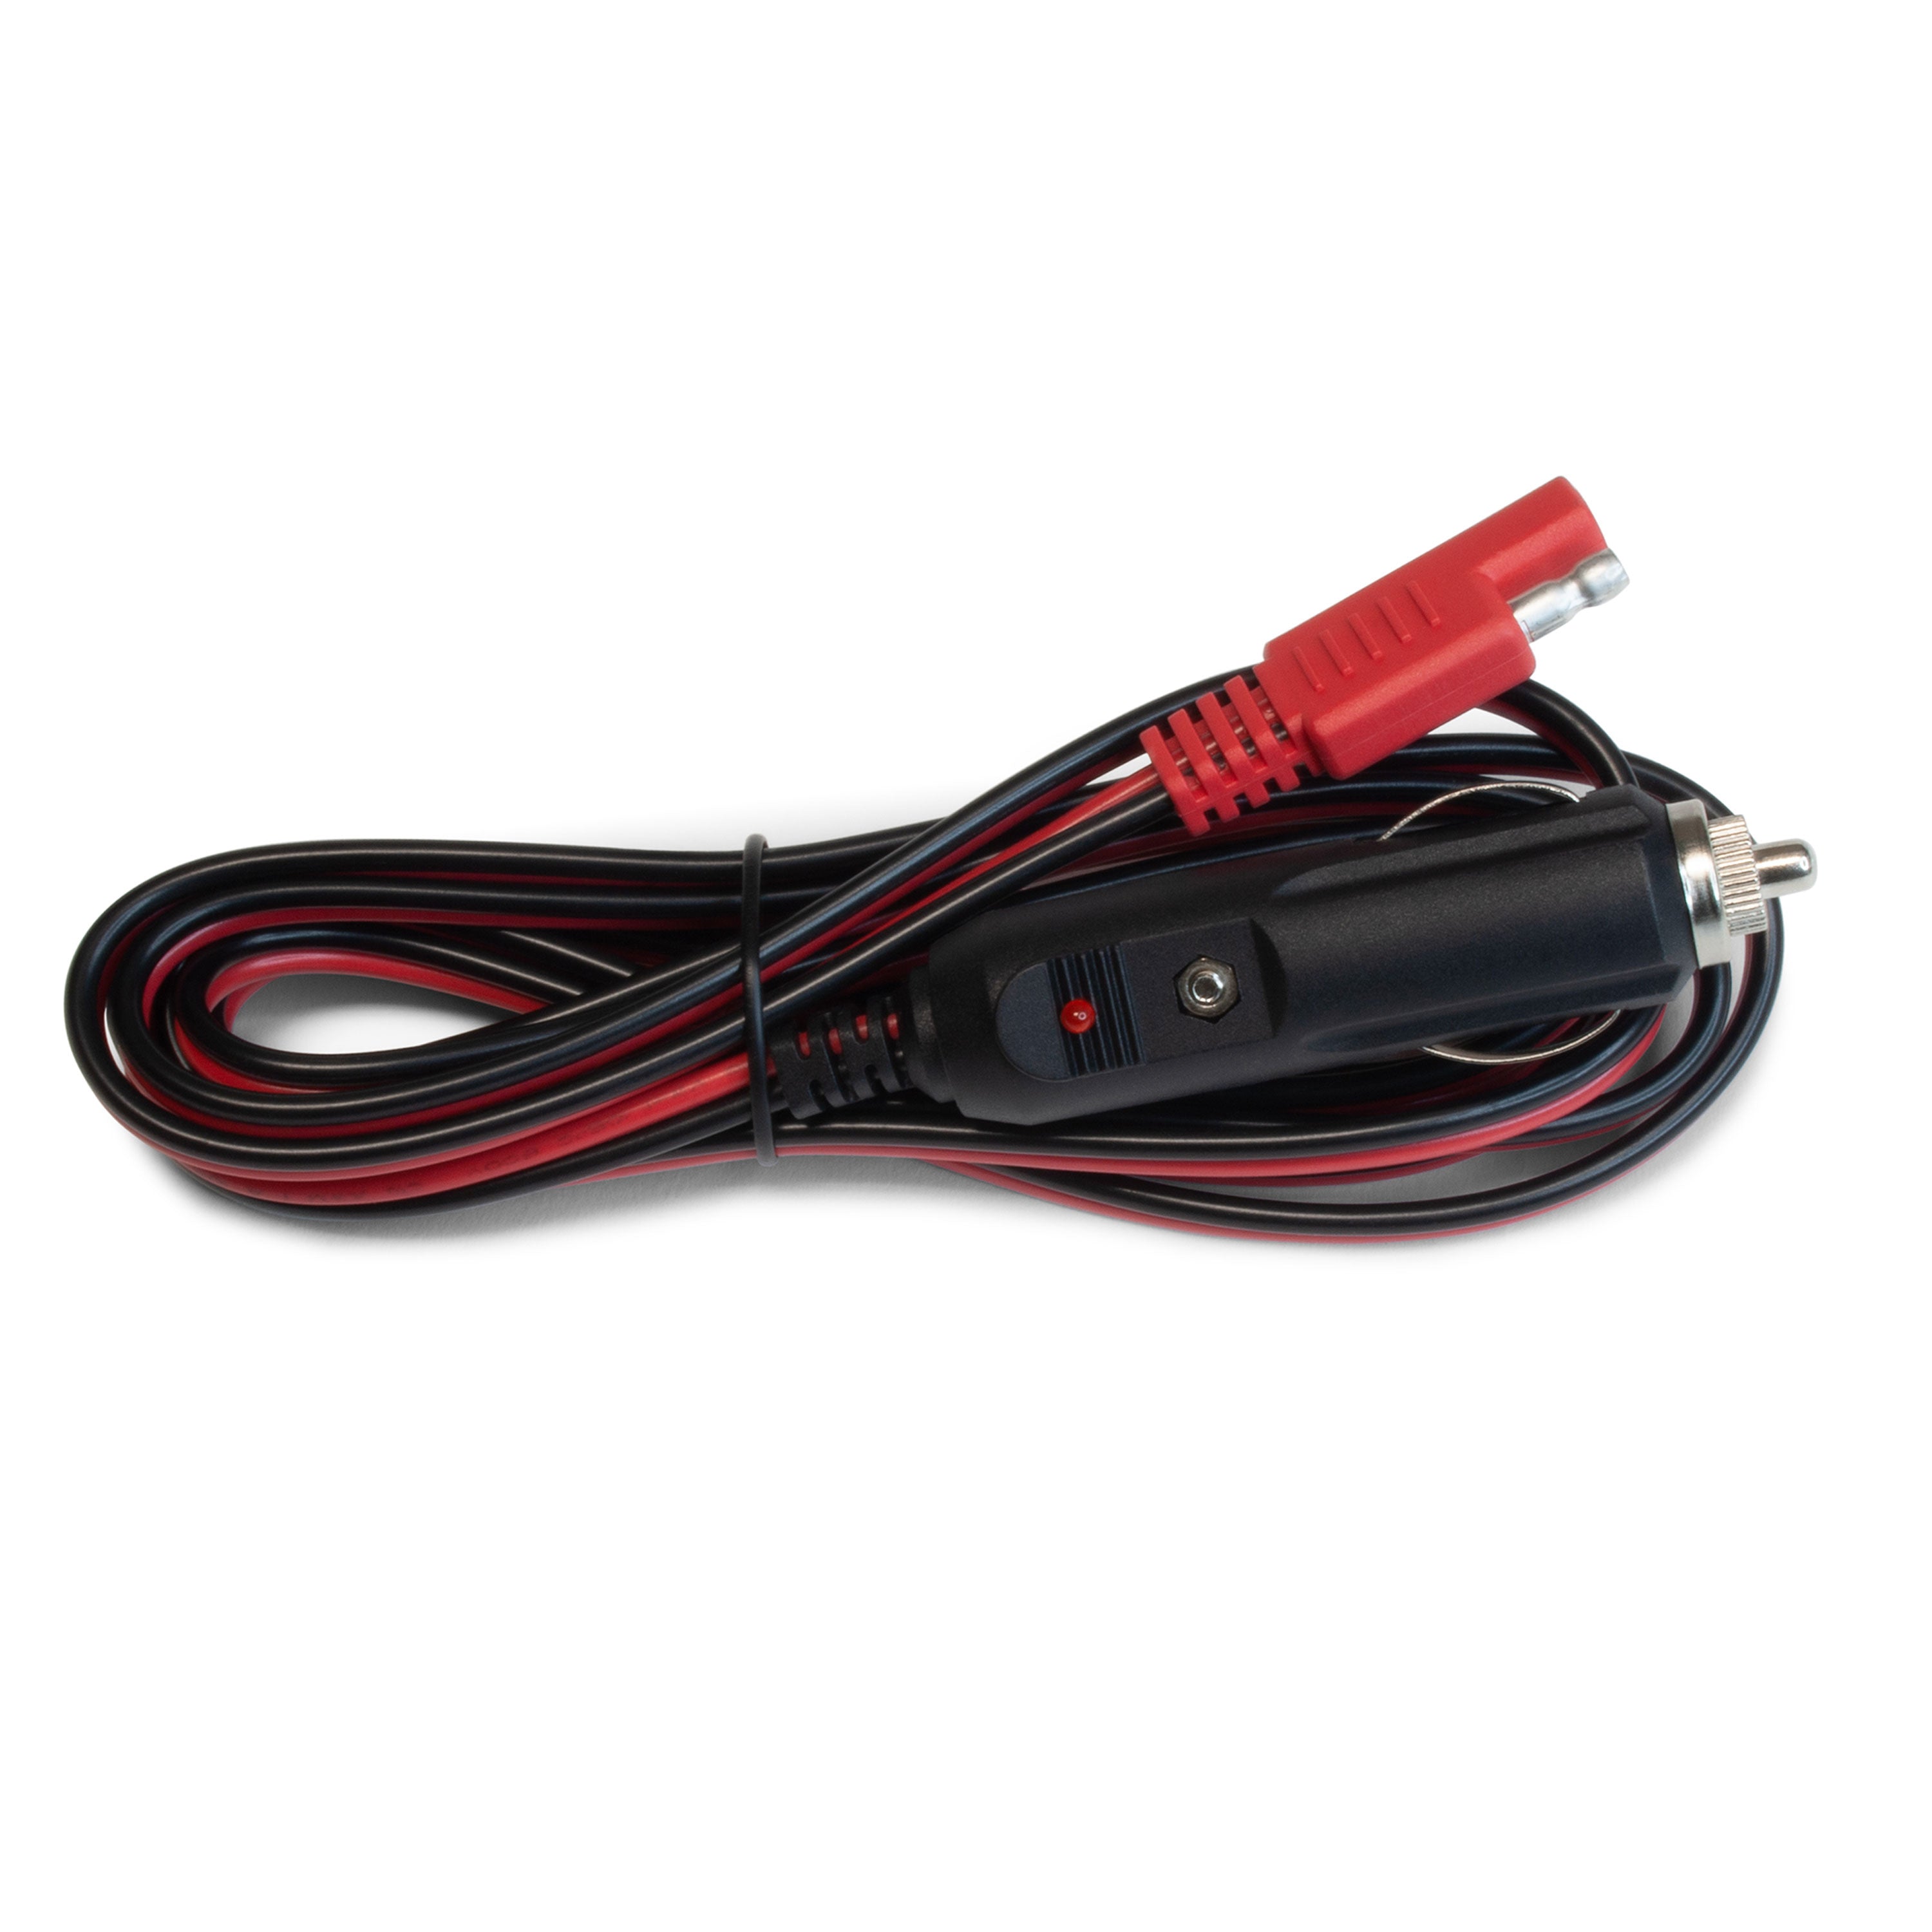 SoundExtreme 12 volt Car Charger power supply - SoundExtreme